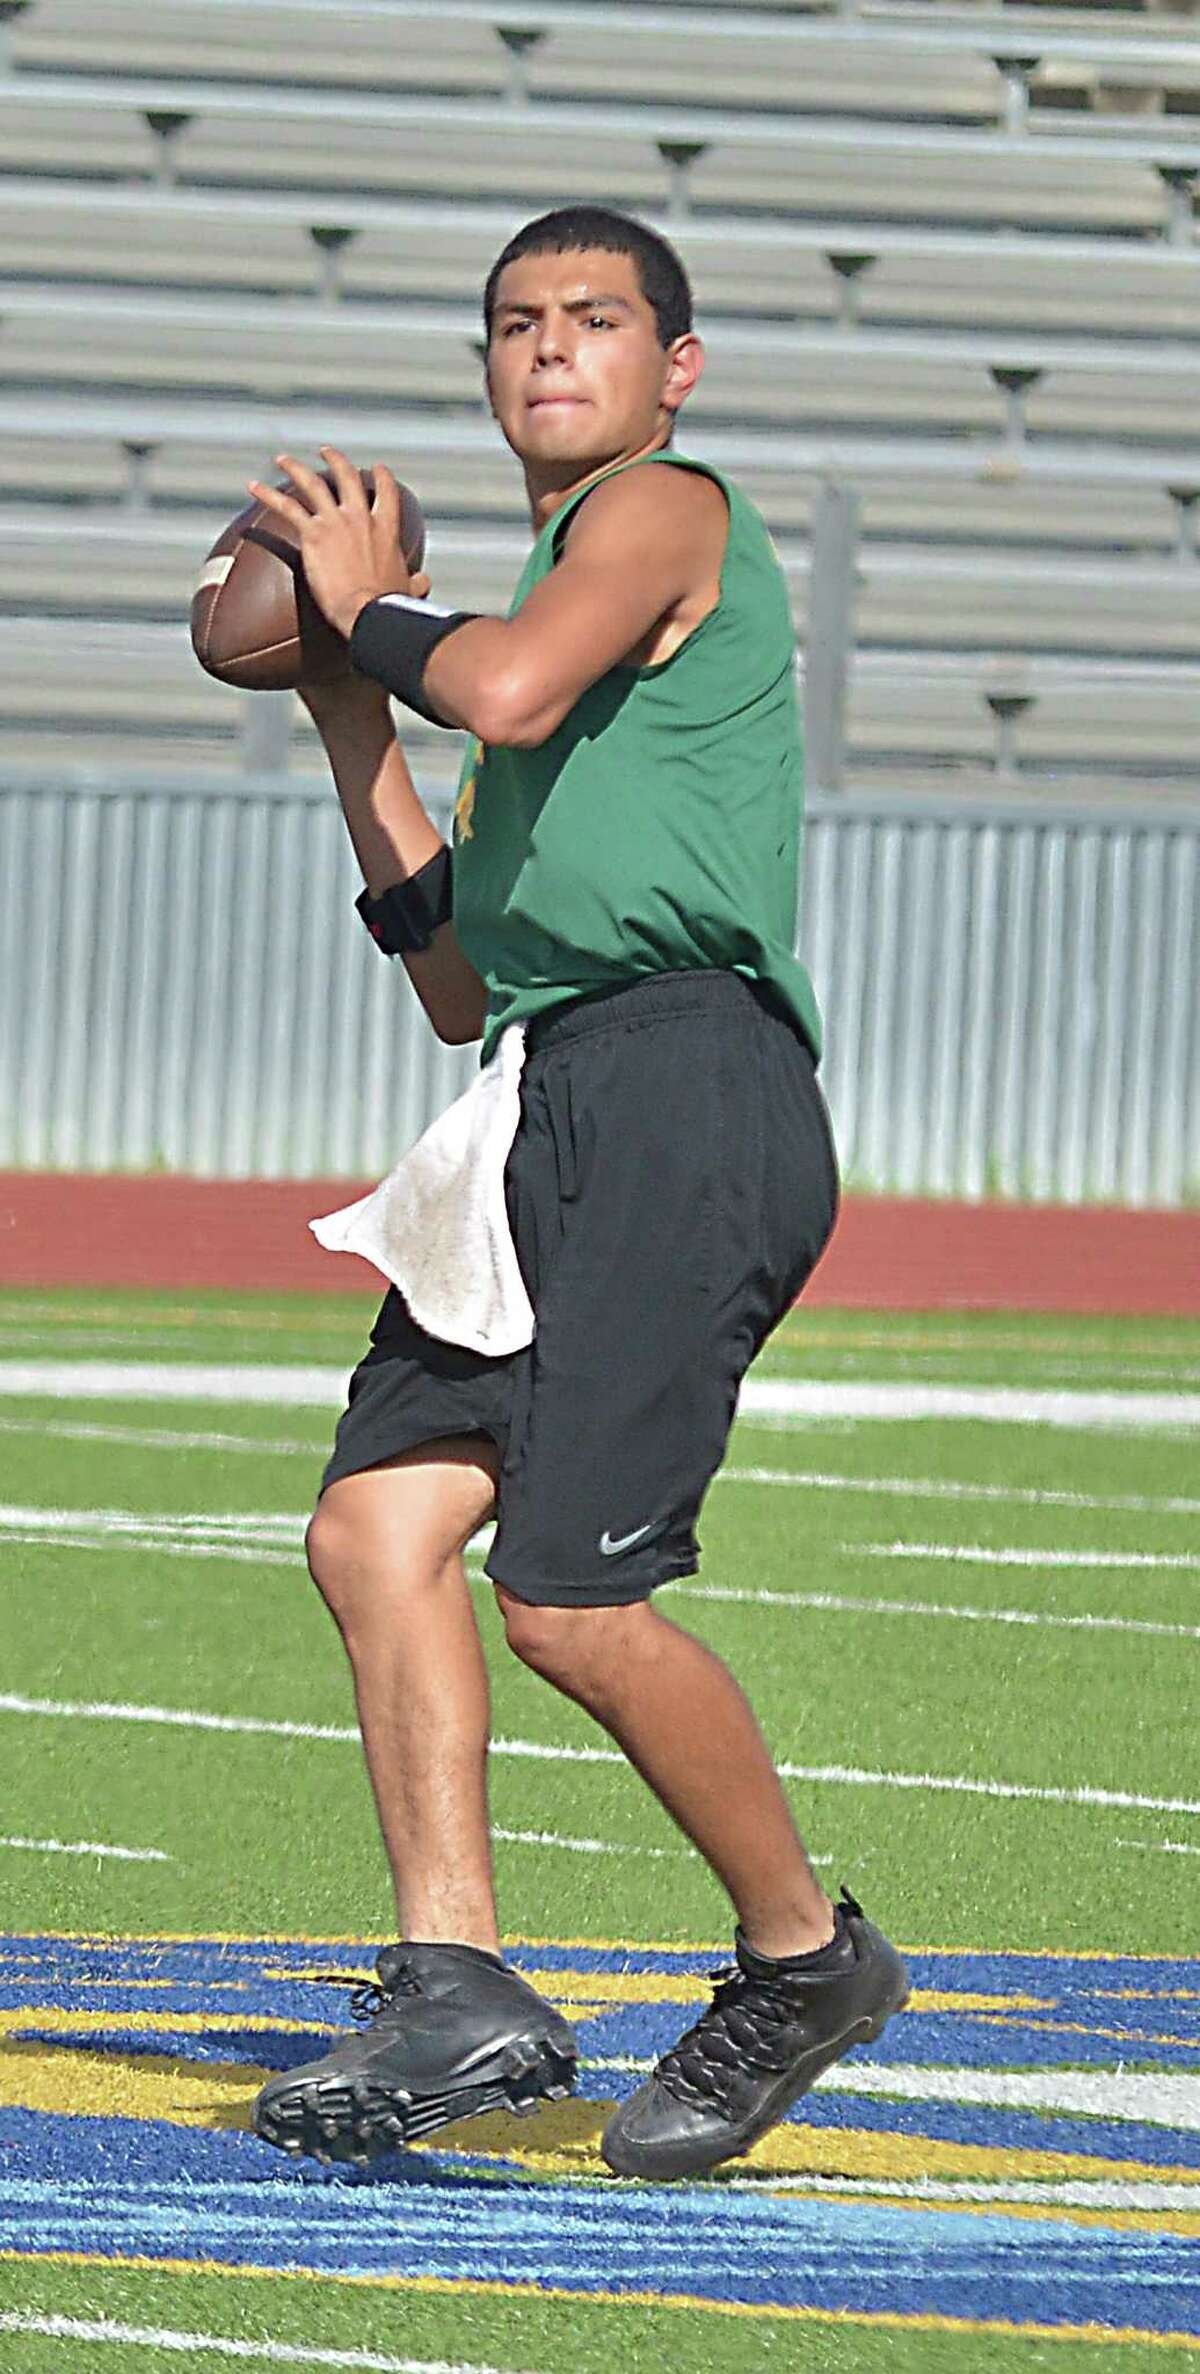 Martin and Nixon square off at 5:30 p.m. at Krueger Field during Week 6 of summer league 7on7 football. The two teams tied 39-39 in the first meeting back in Week 2.